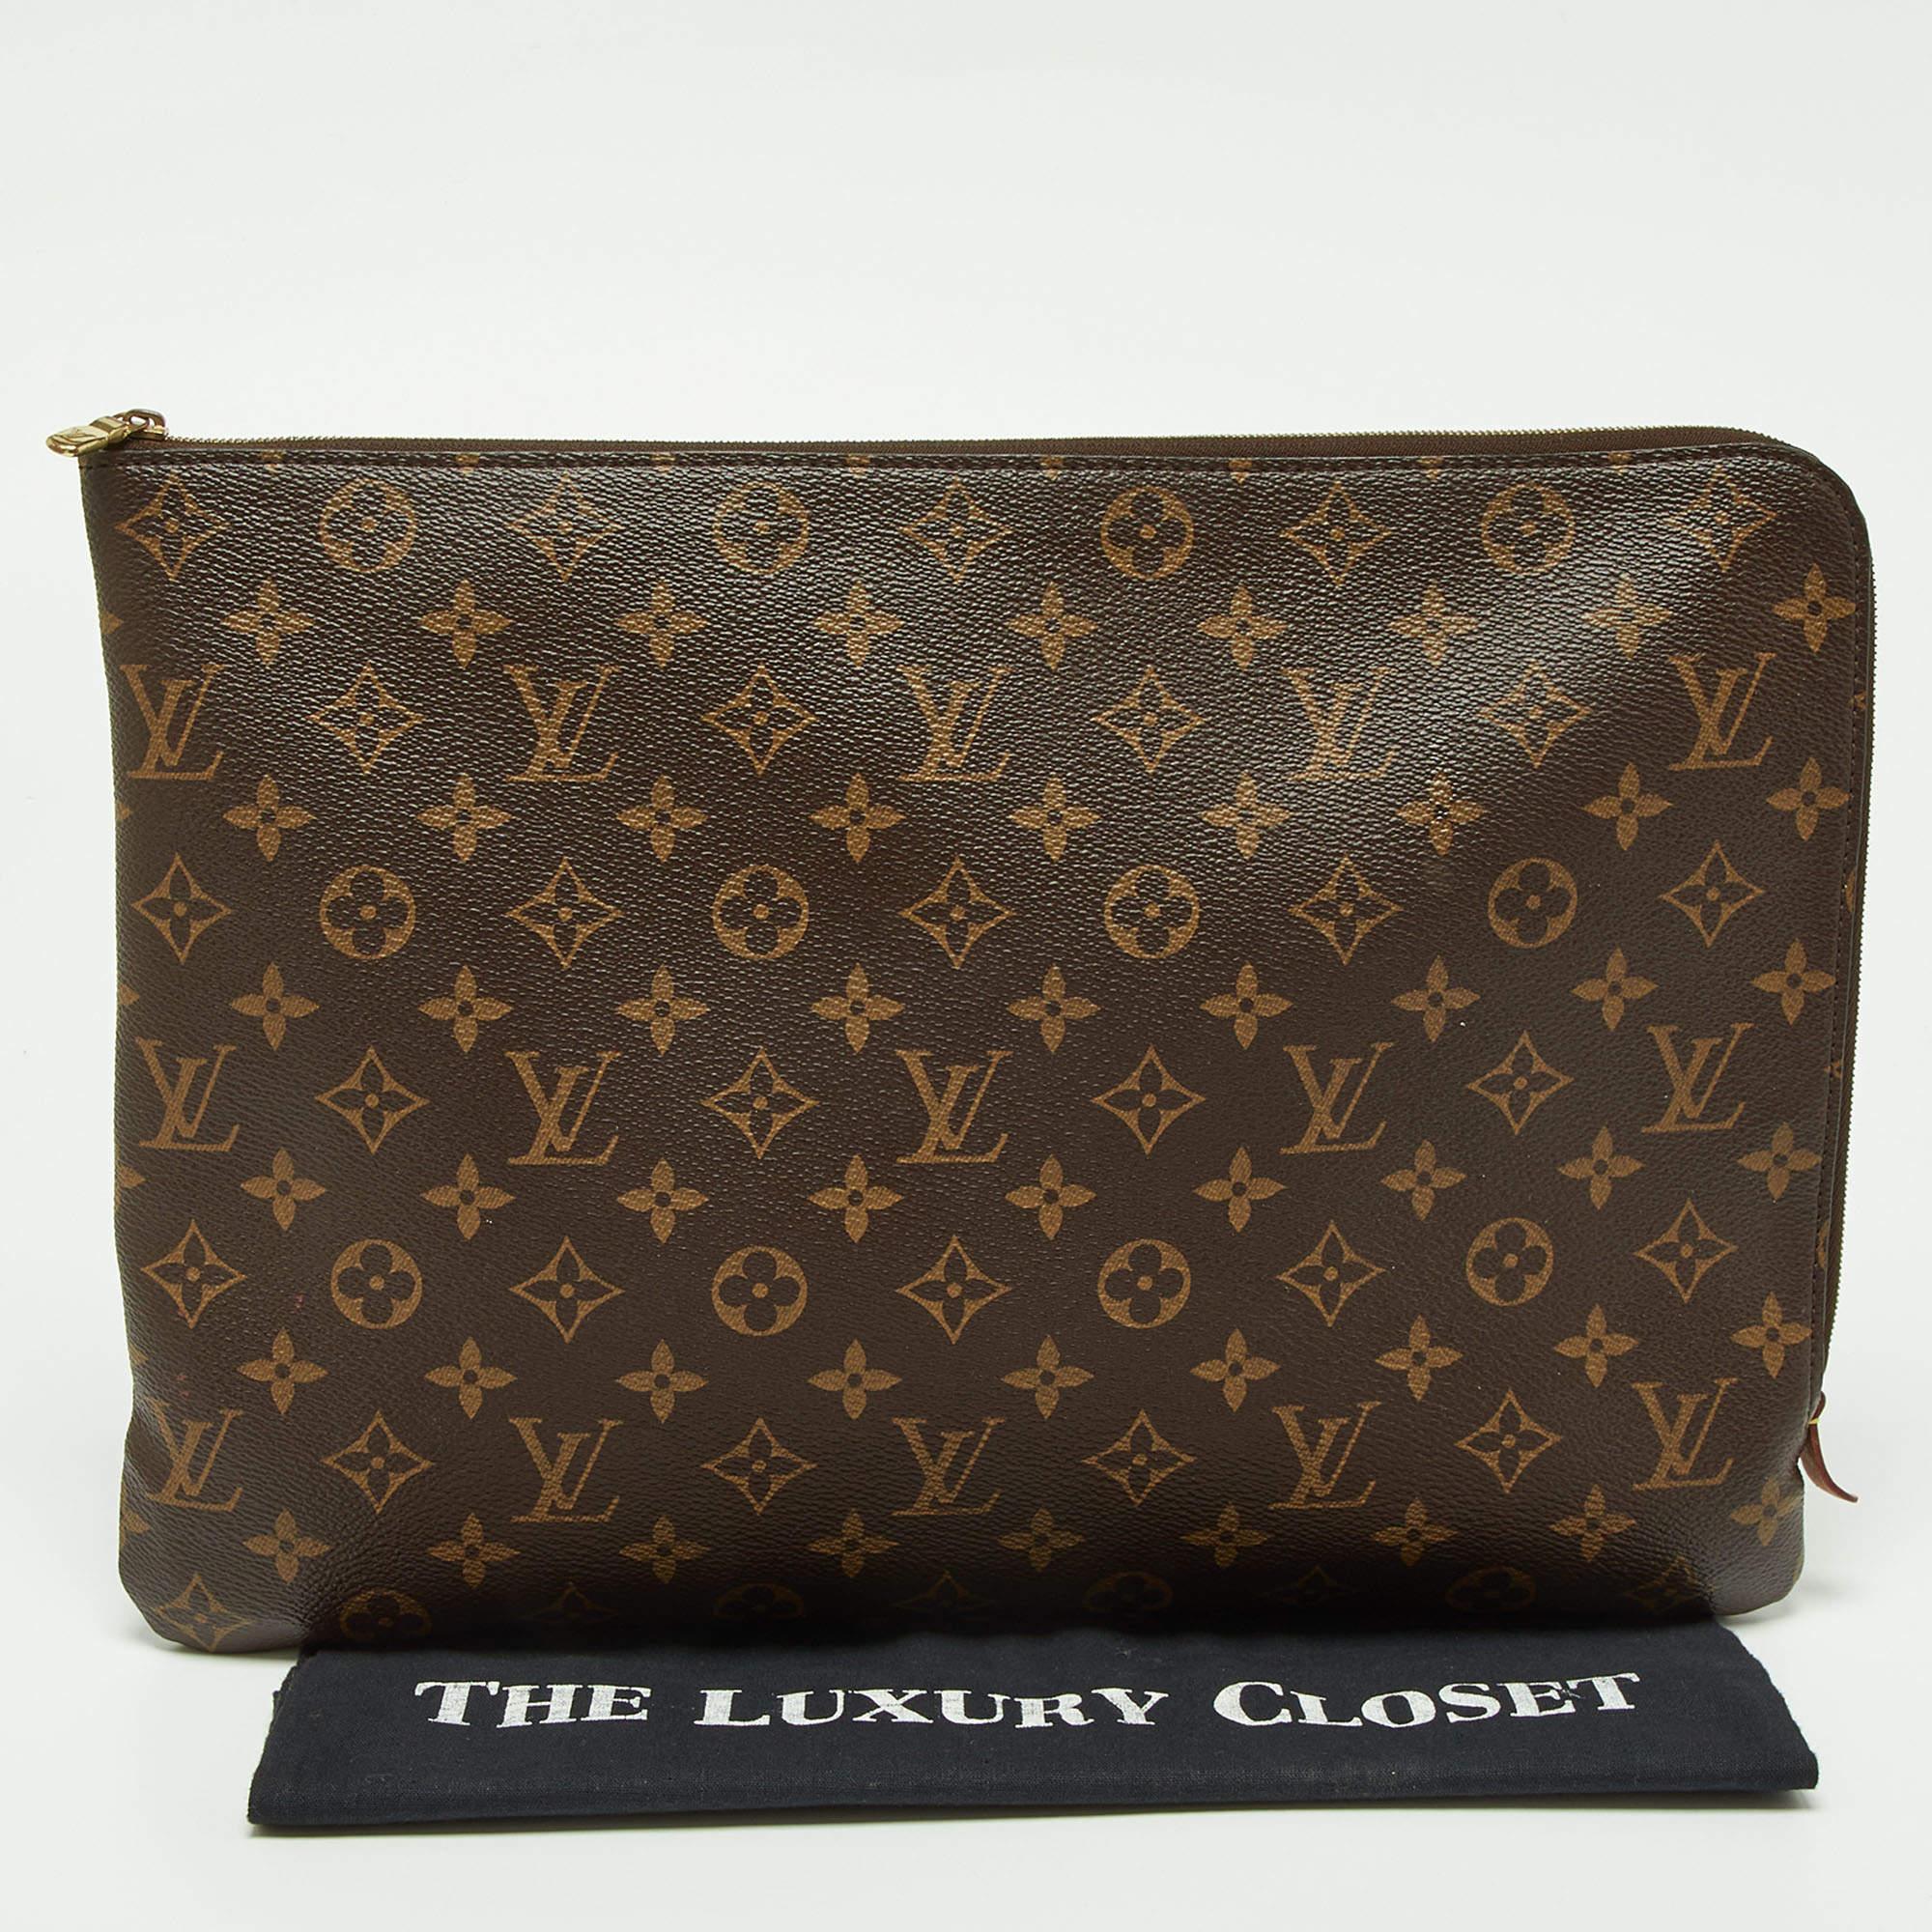 Keep your documents protected and secured with this Louis Vuitton portfolio case. The Monogram coated canvas on the exterior makes it distinctly LV. It comes with a gold-toned zipper fastening and is sized ideally to store documents.

